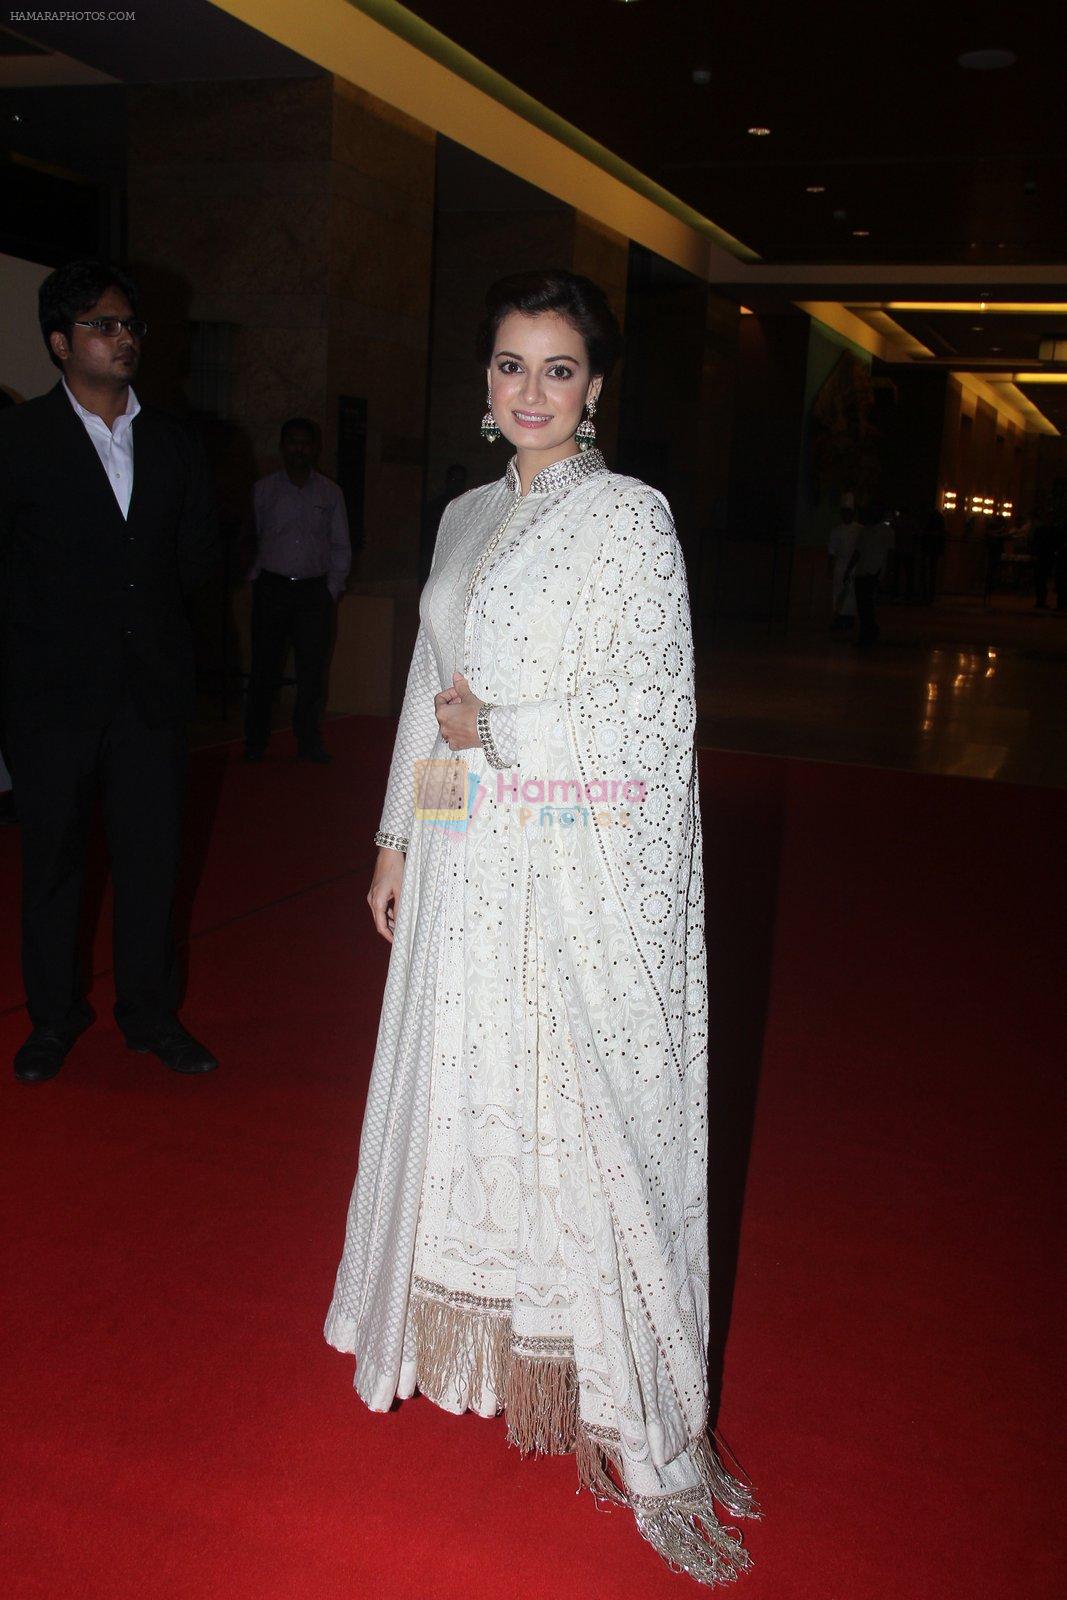 Dia Mirza during Jewellers for Hope Charity Dinner event in Mumbai, India on August 4, 2016